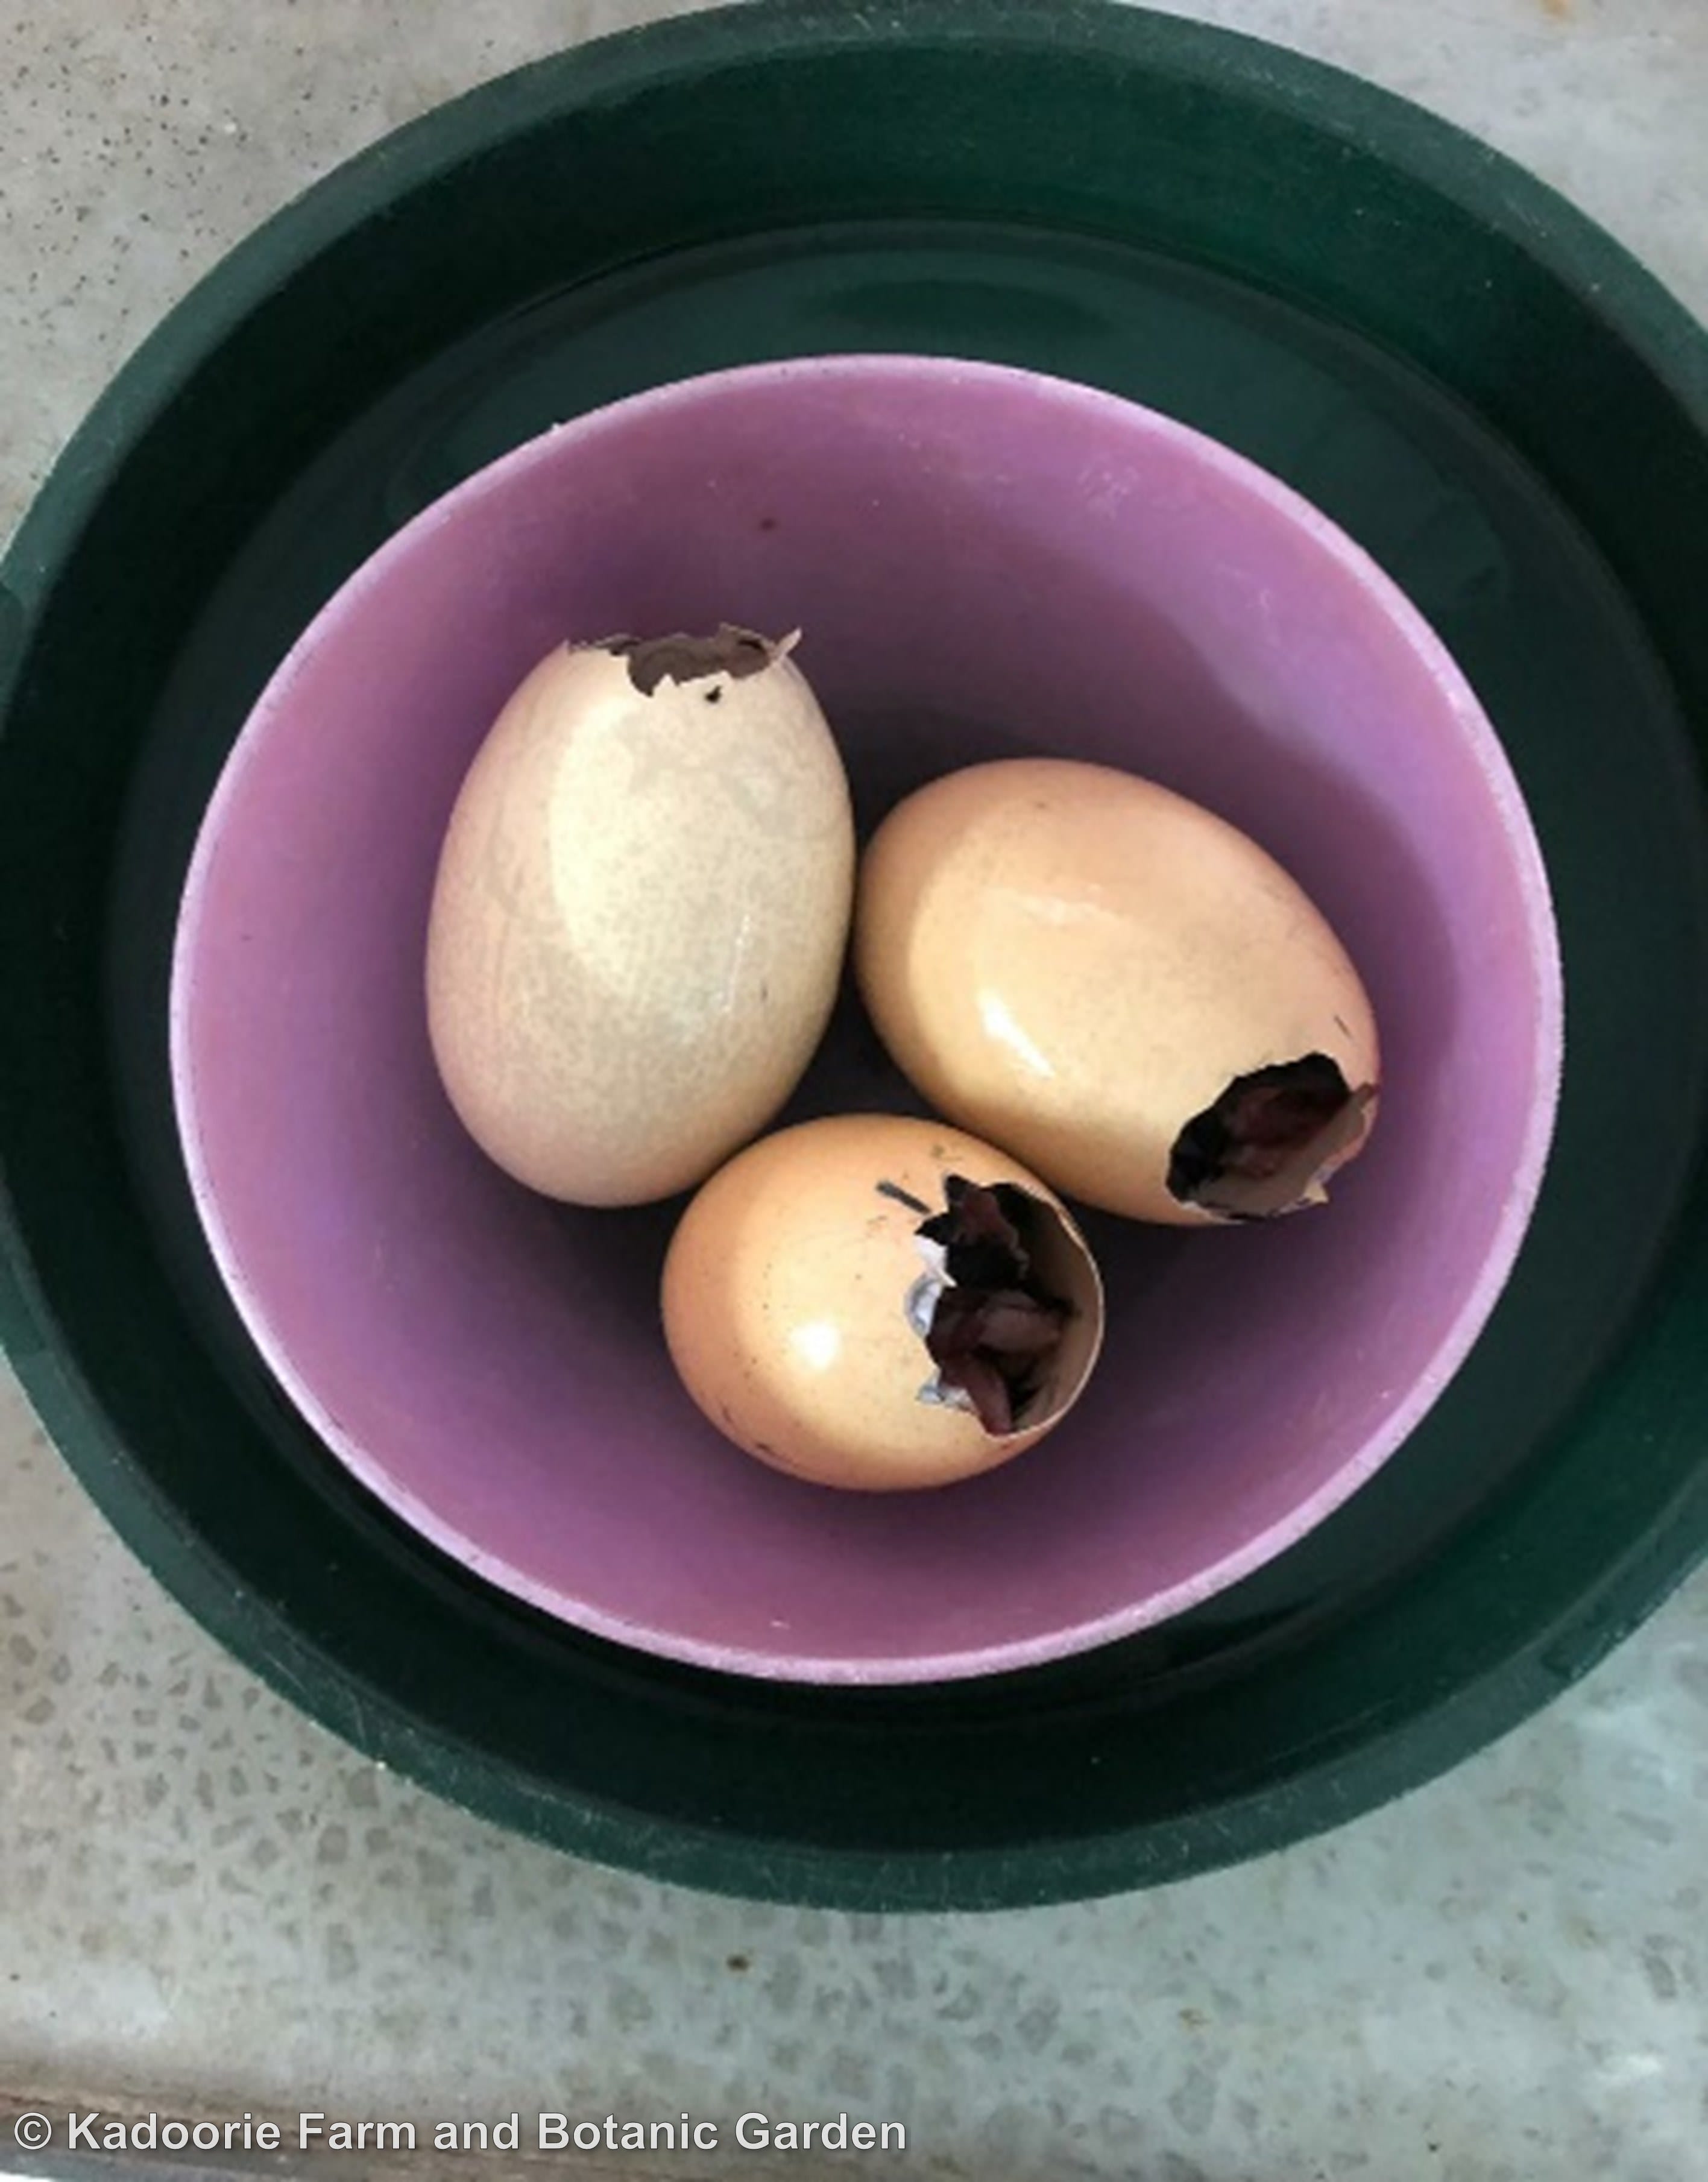 Food items can also be used for enrichment for animals when they are served in an imaginative way. These empty egg shells are stuffed with meat and are used as enrichment for raptors. (Photo credit: Kadoorie Farm and Botanic Garden)